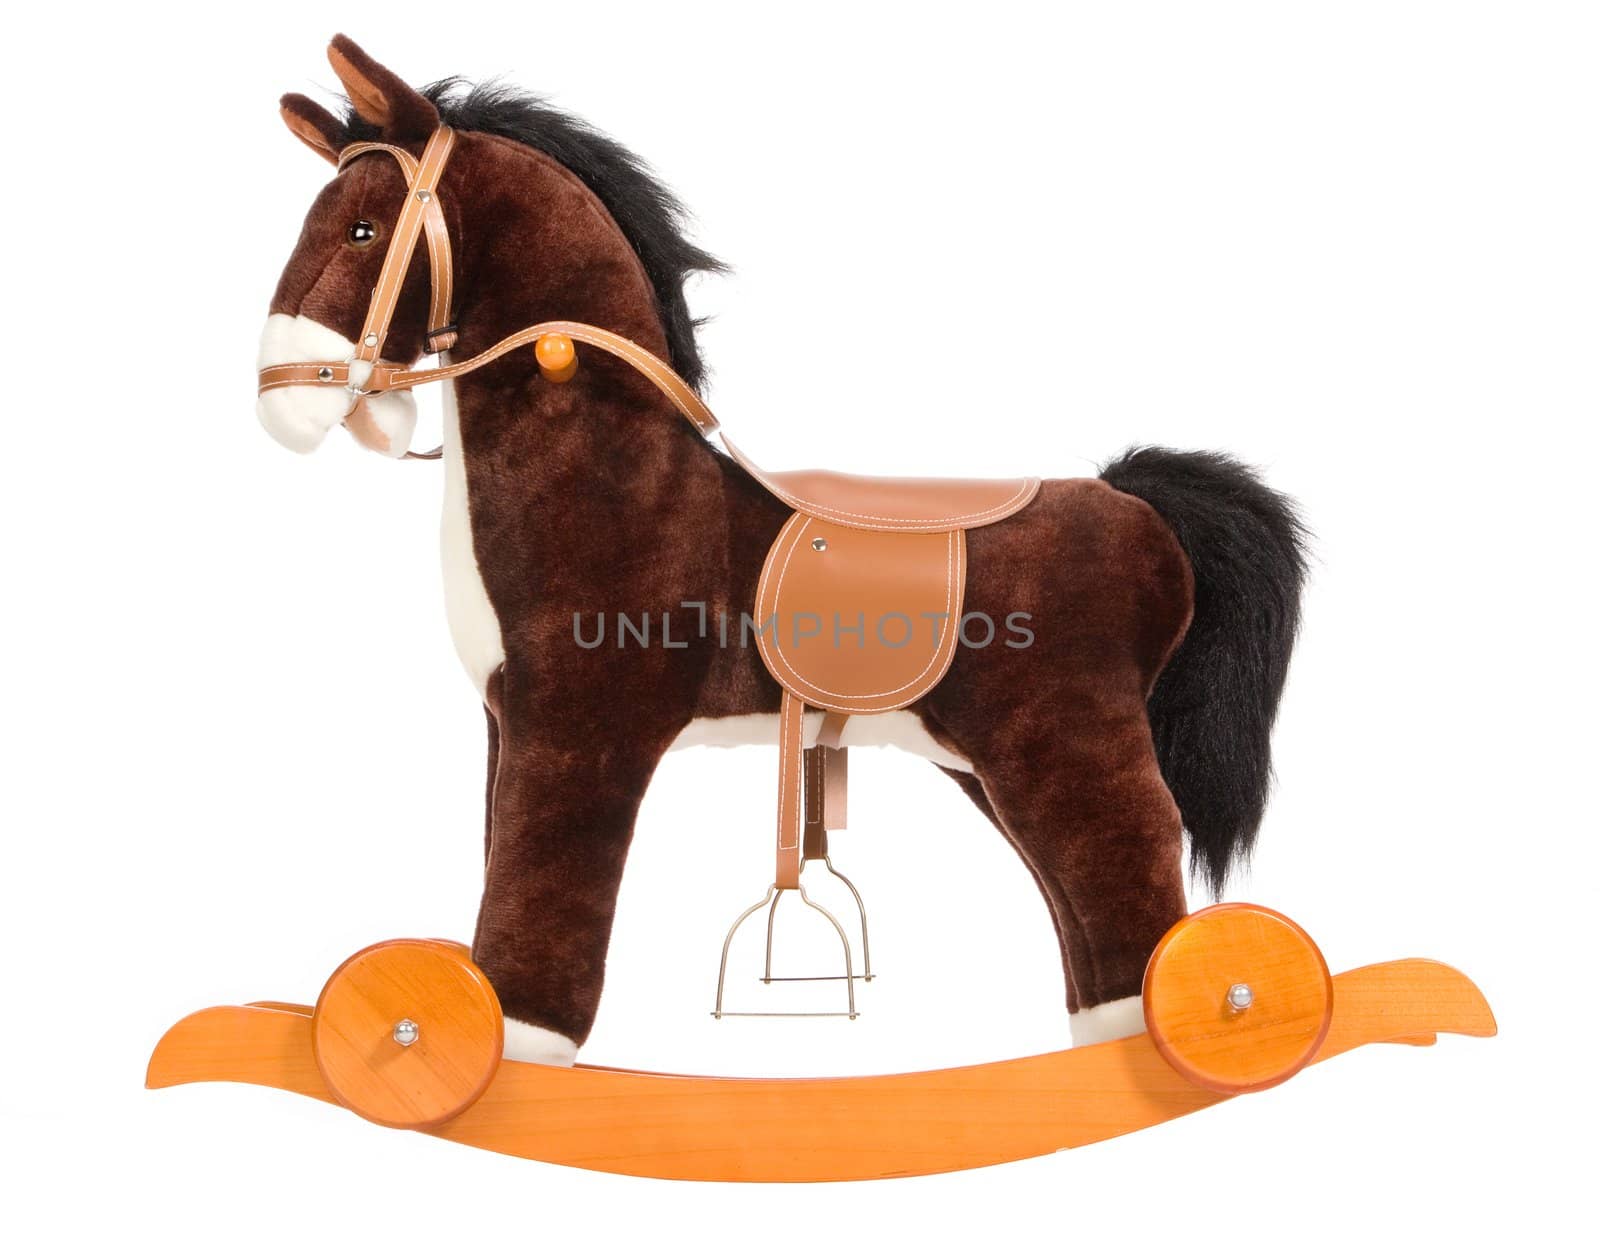 Brown toy horse with a saddle, a bridle and wheels
